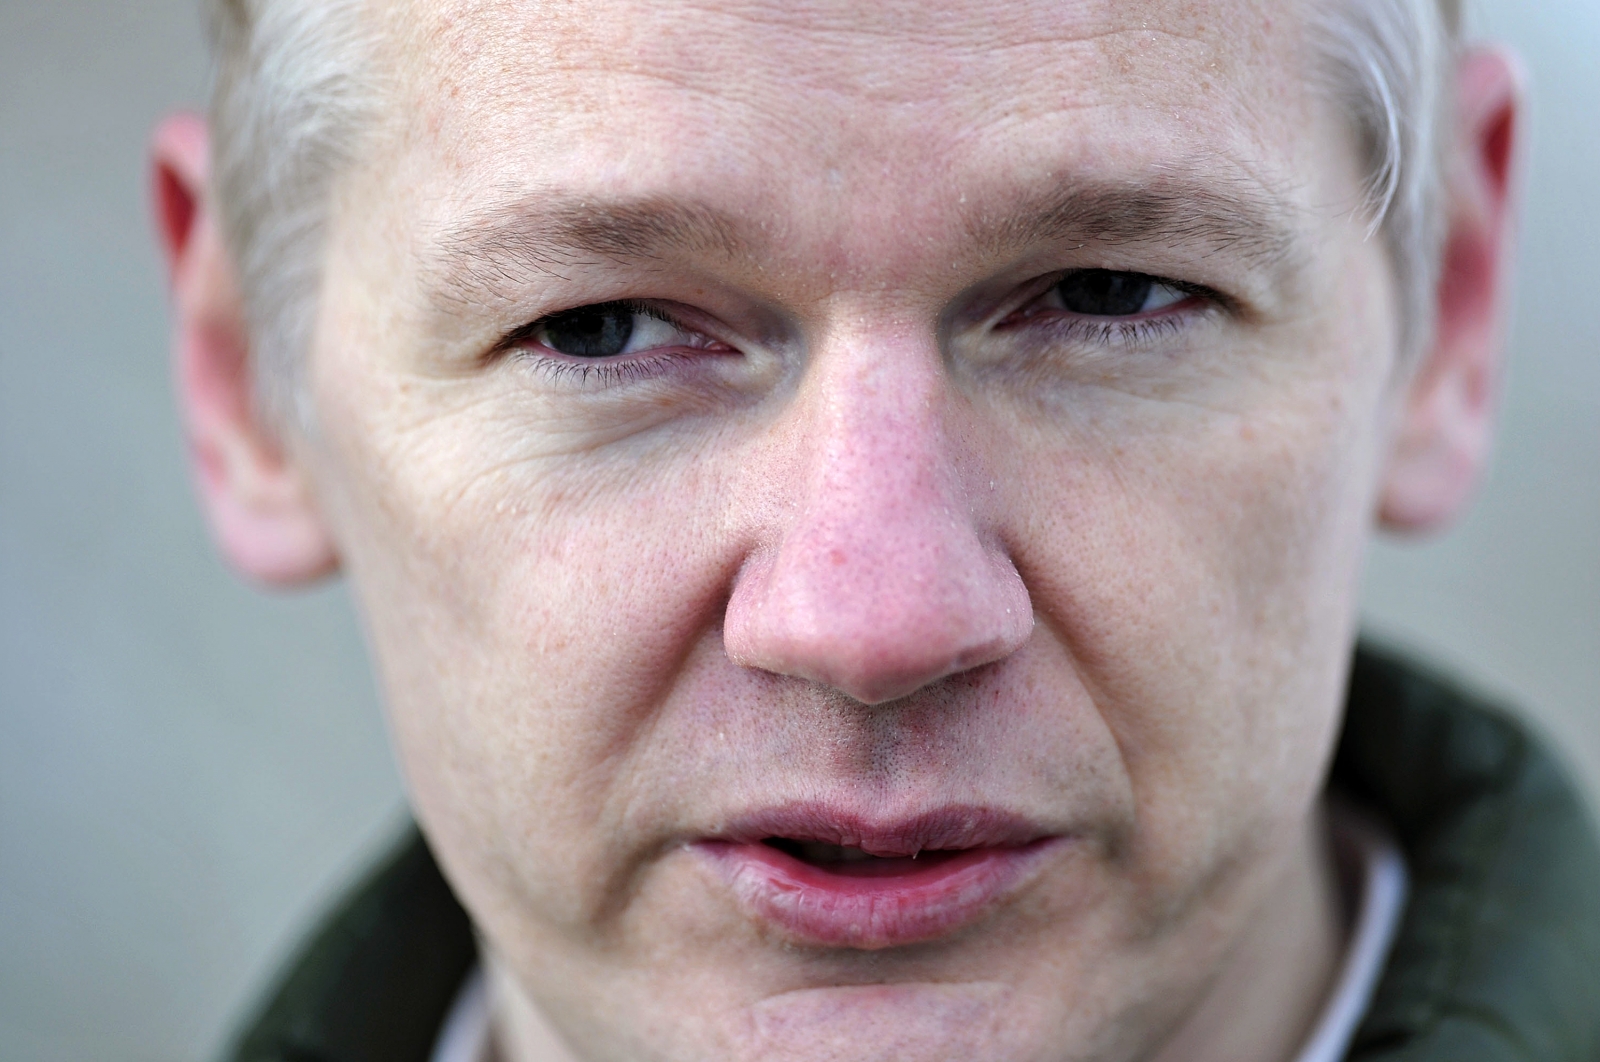 Julian Assange claims 'crazed' US forces tried to hack 